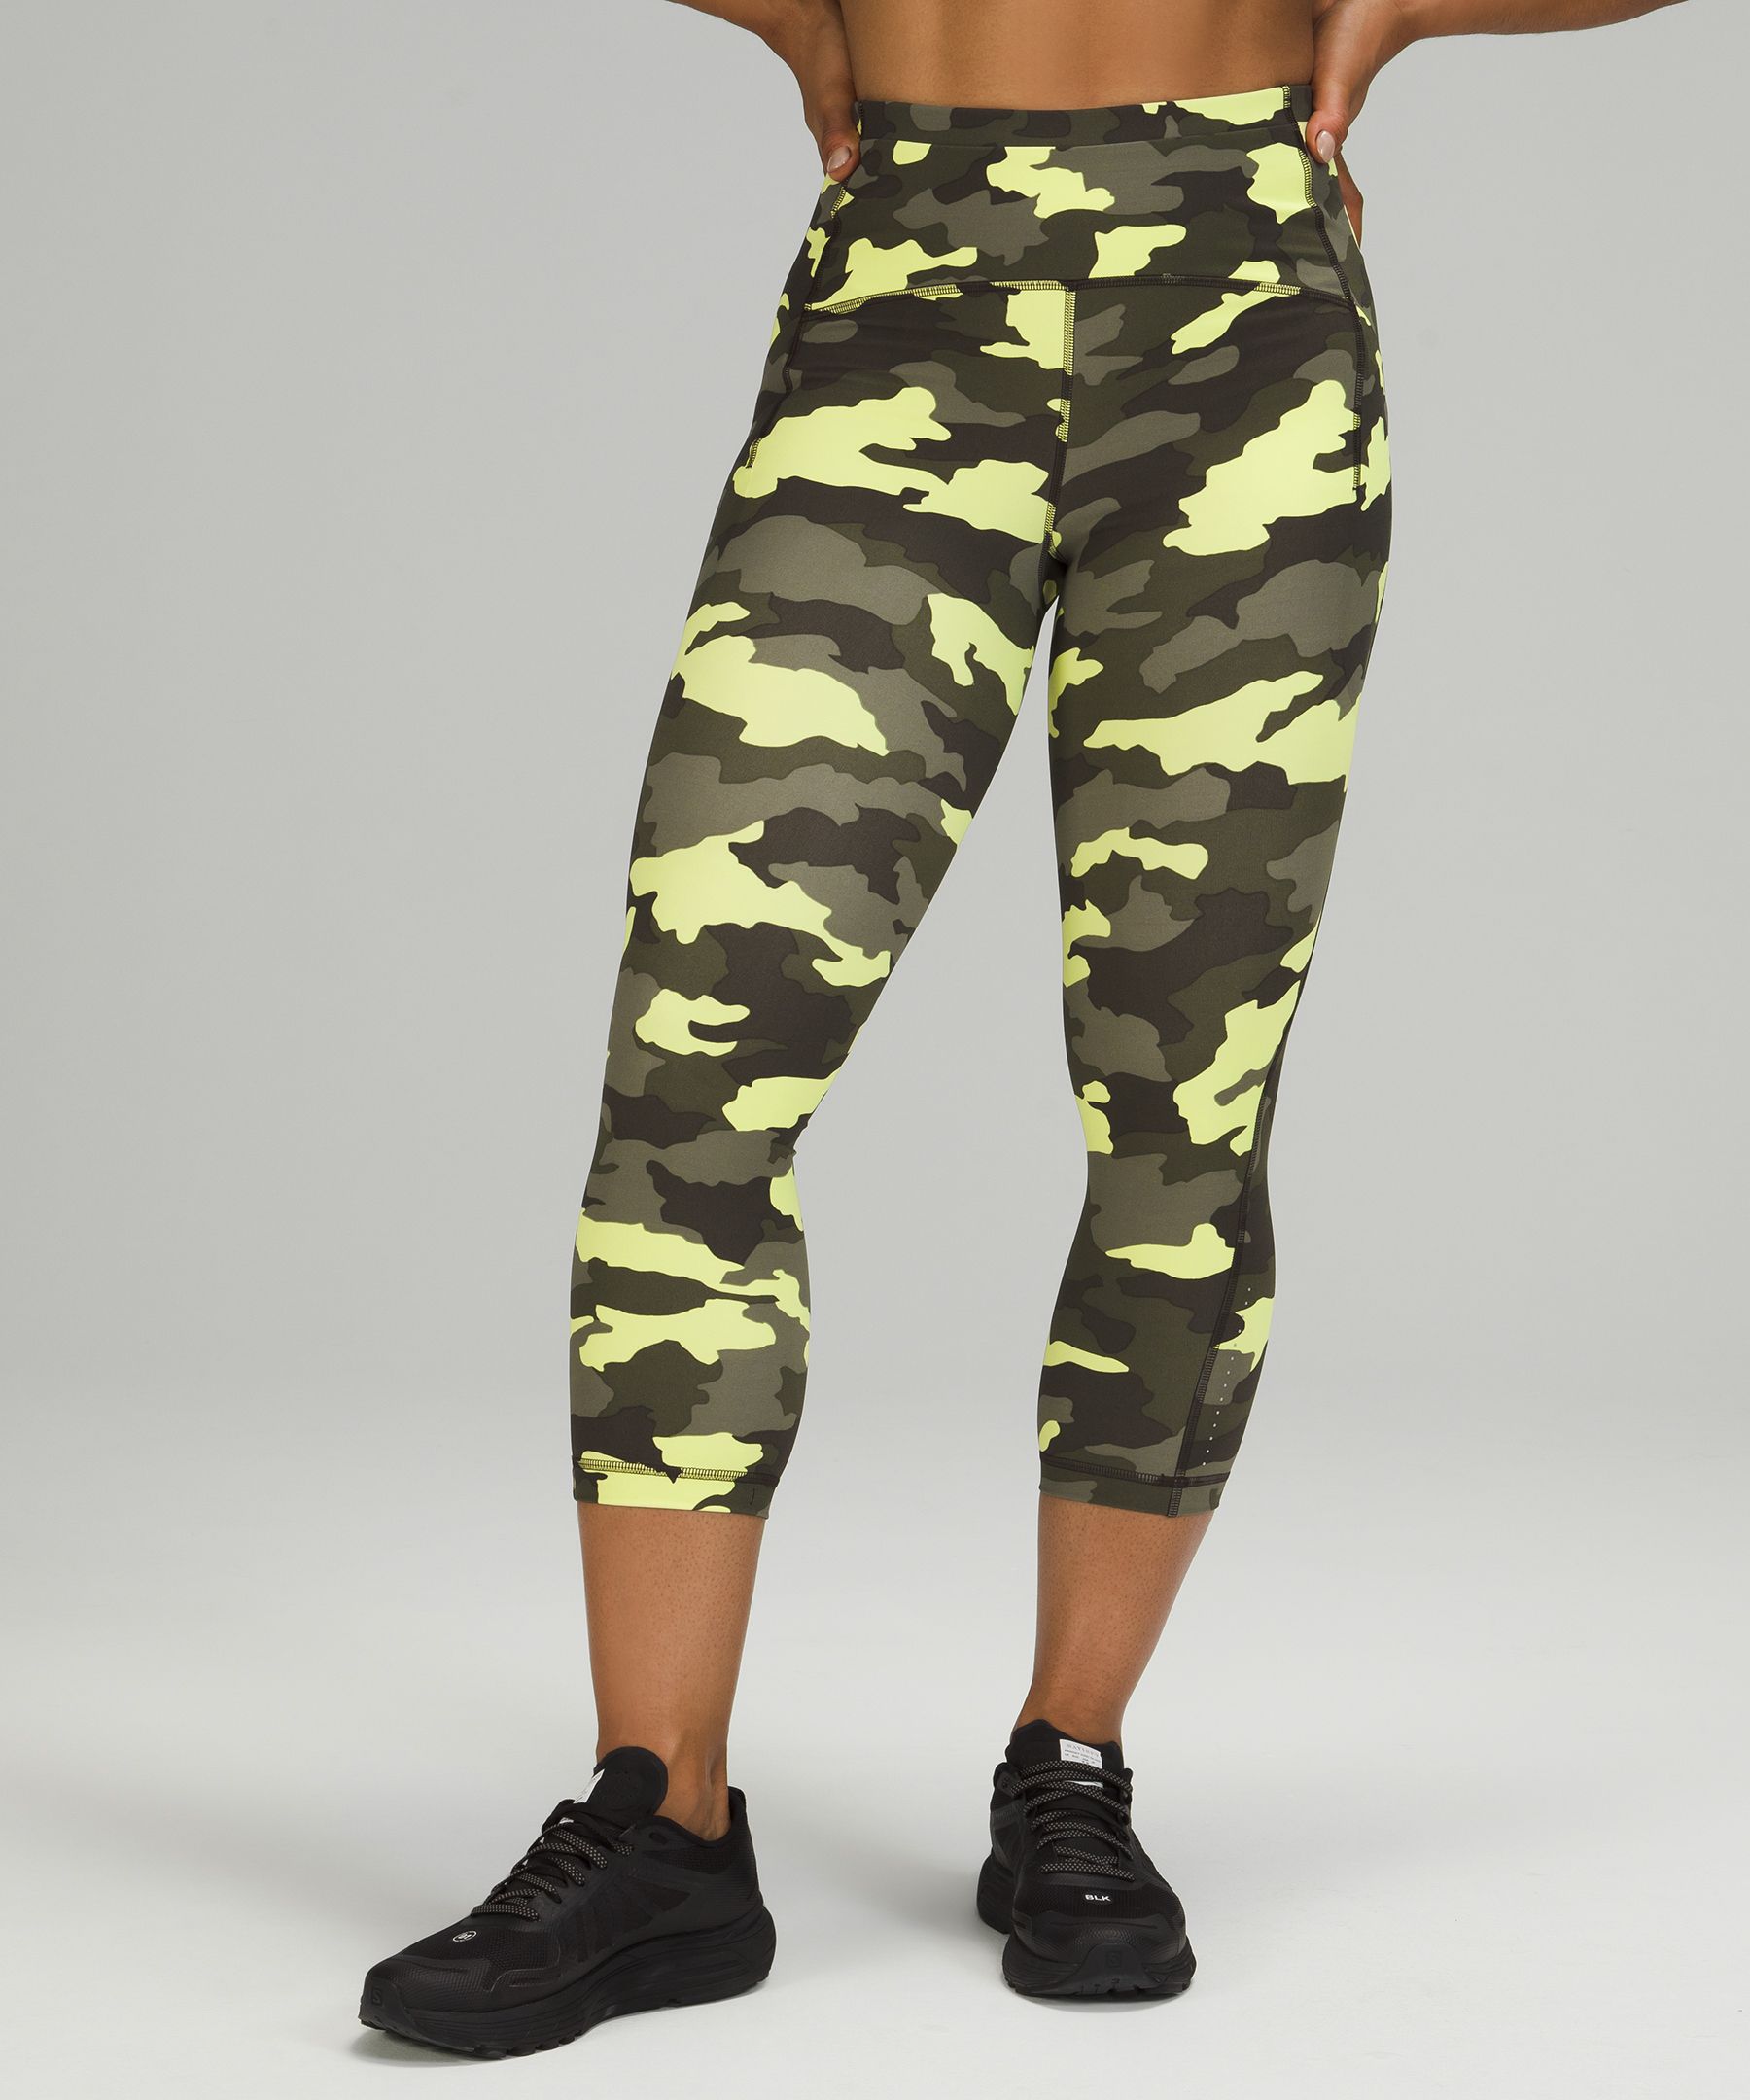 Green Camo Leggings for Women Army / Military Camouflage Pattern Mid Waist  Full Length Workout Pants Perfect for Running, Crossfit and Yoga -   Canada